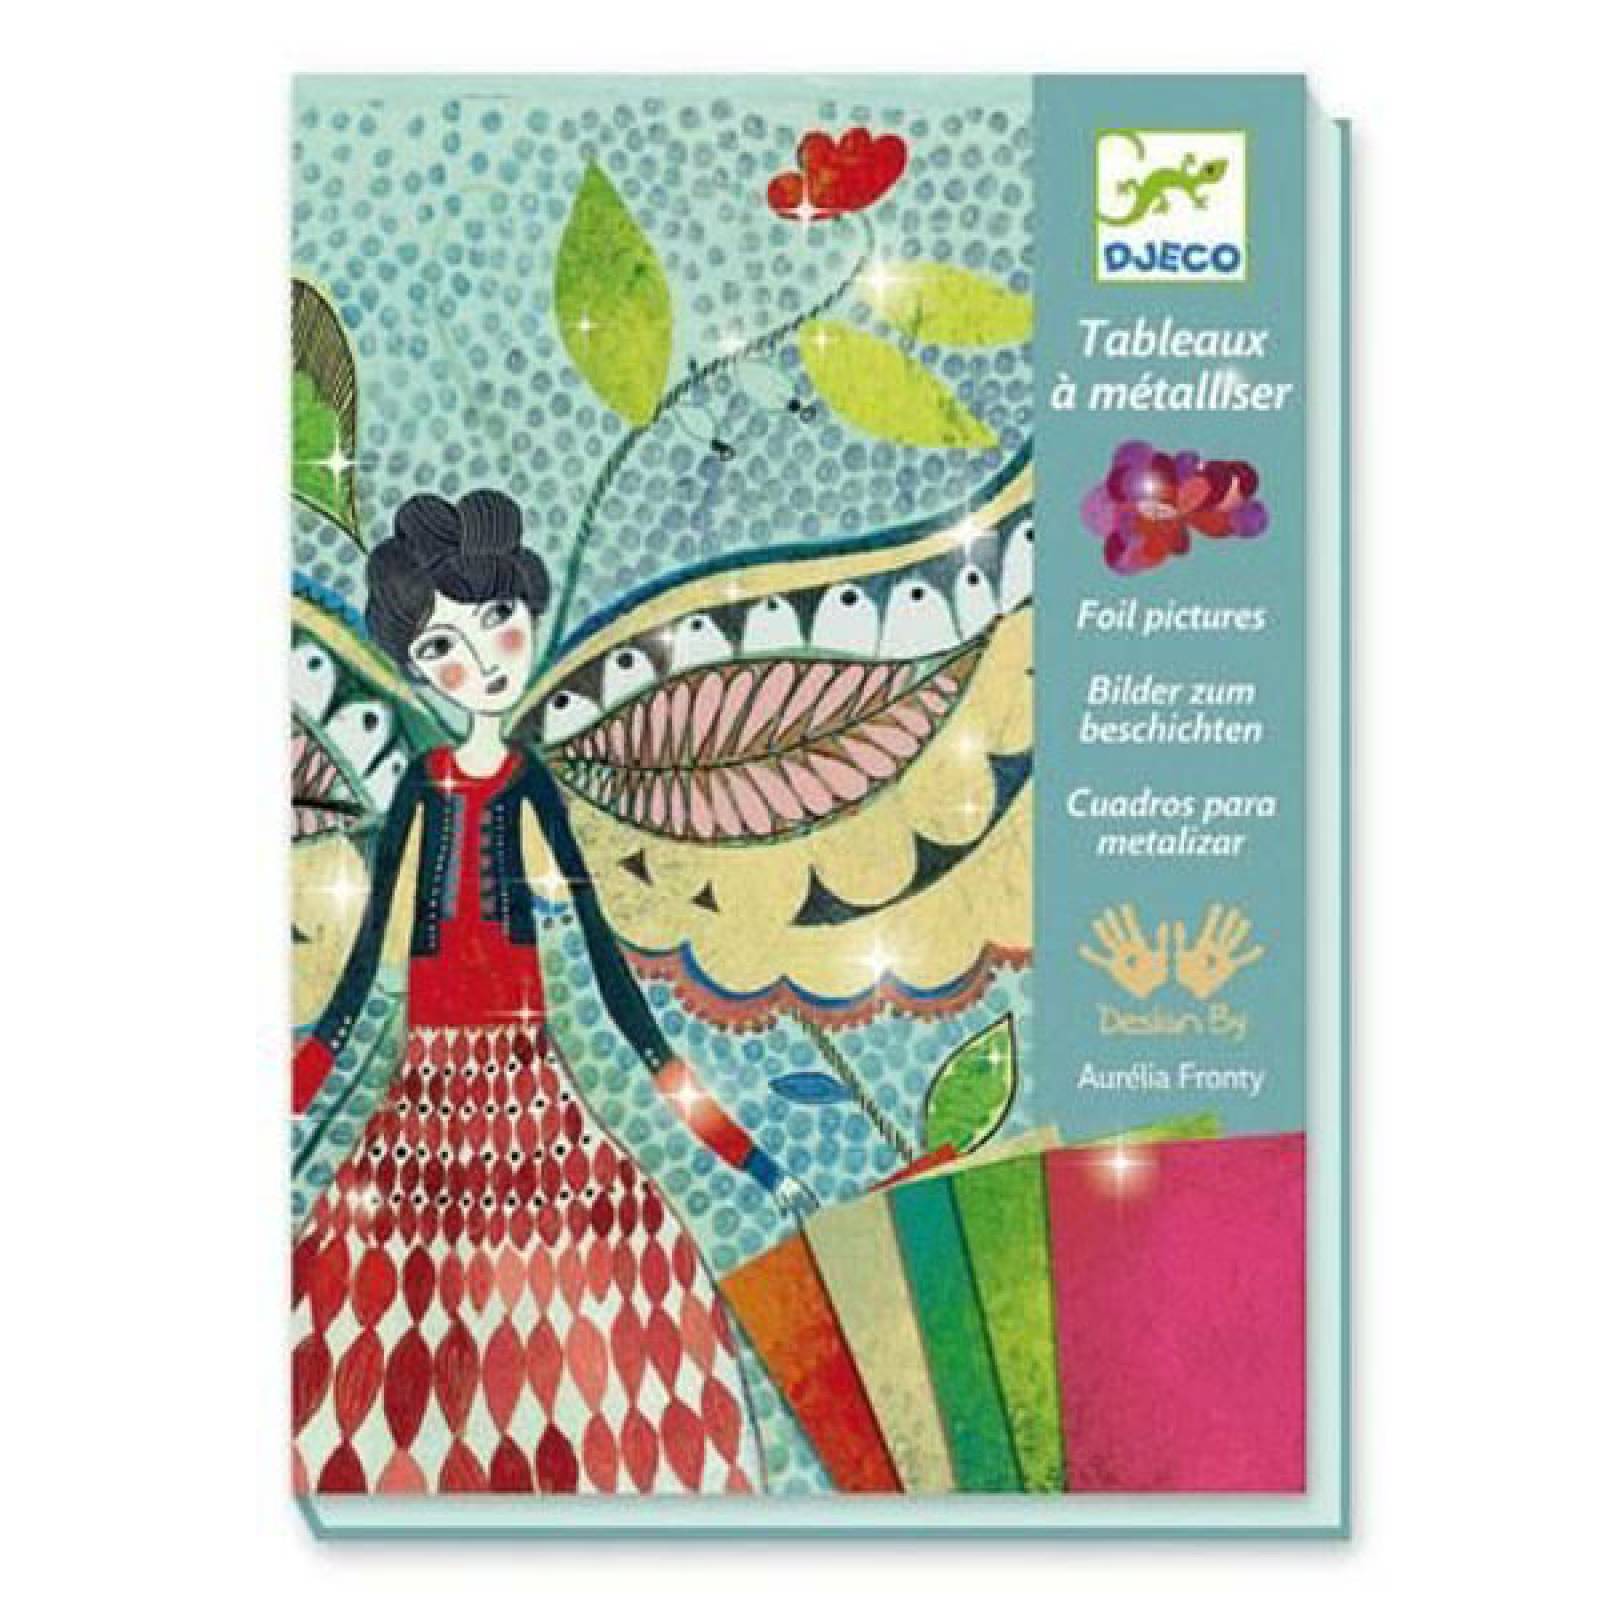 Fireflies Foil Pictures Set By Djeco 7-13yrs